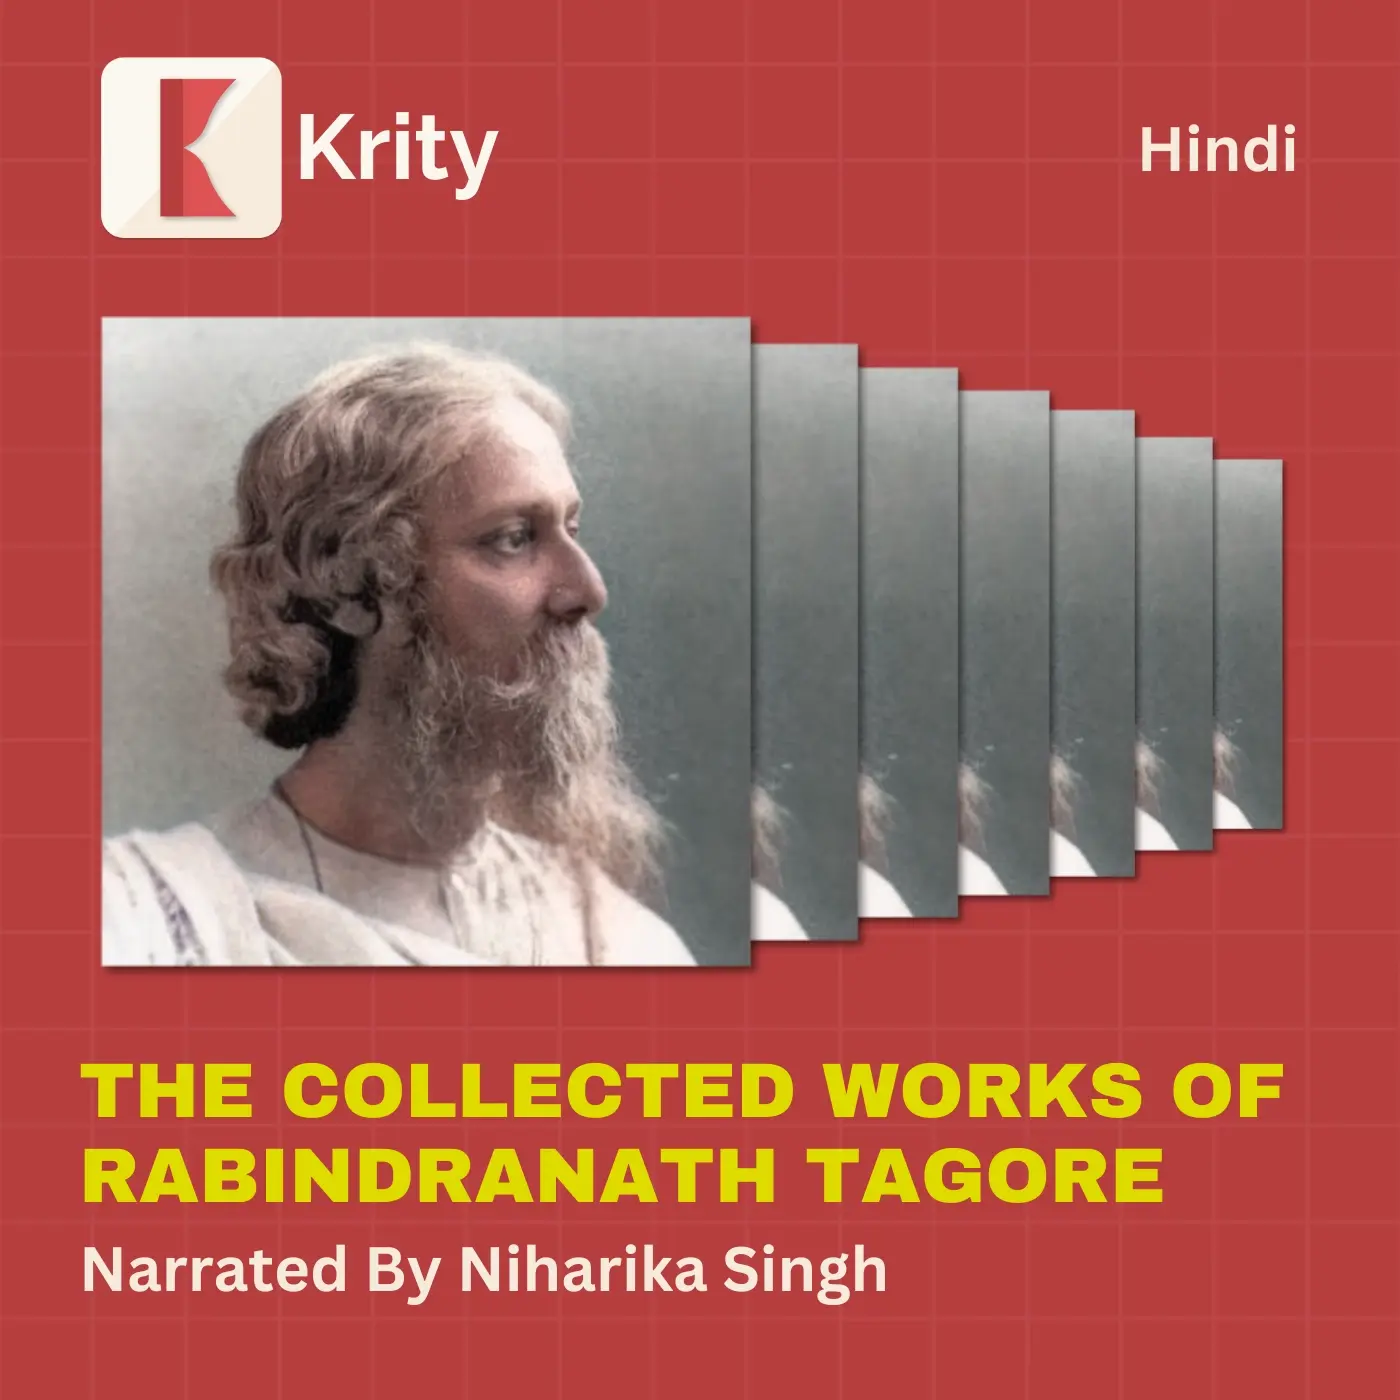 The Collected Works of Rabindranath Tagore